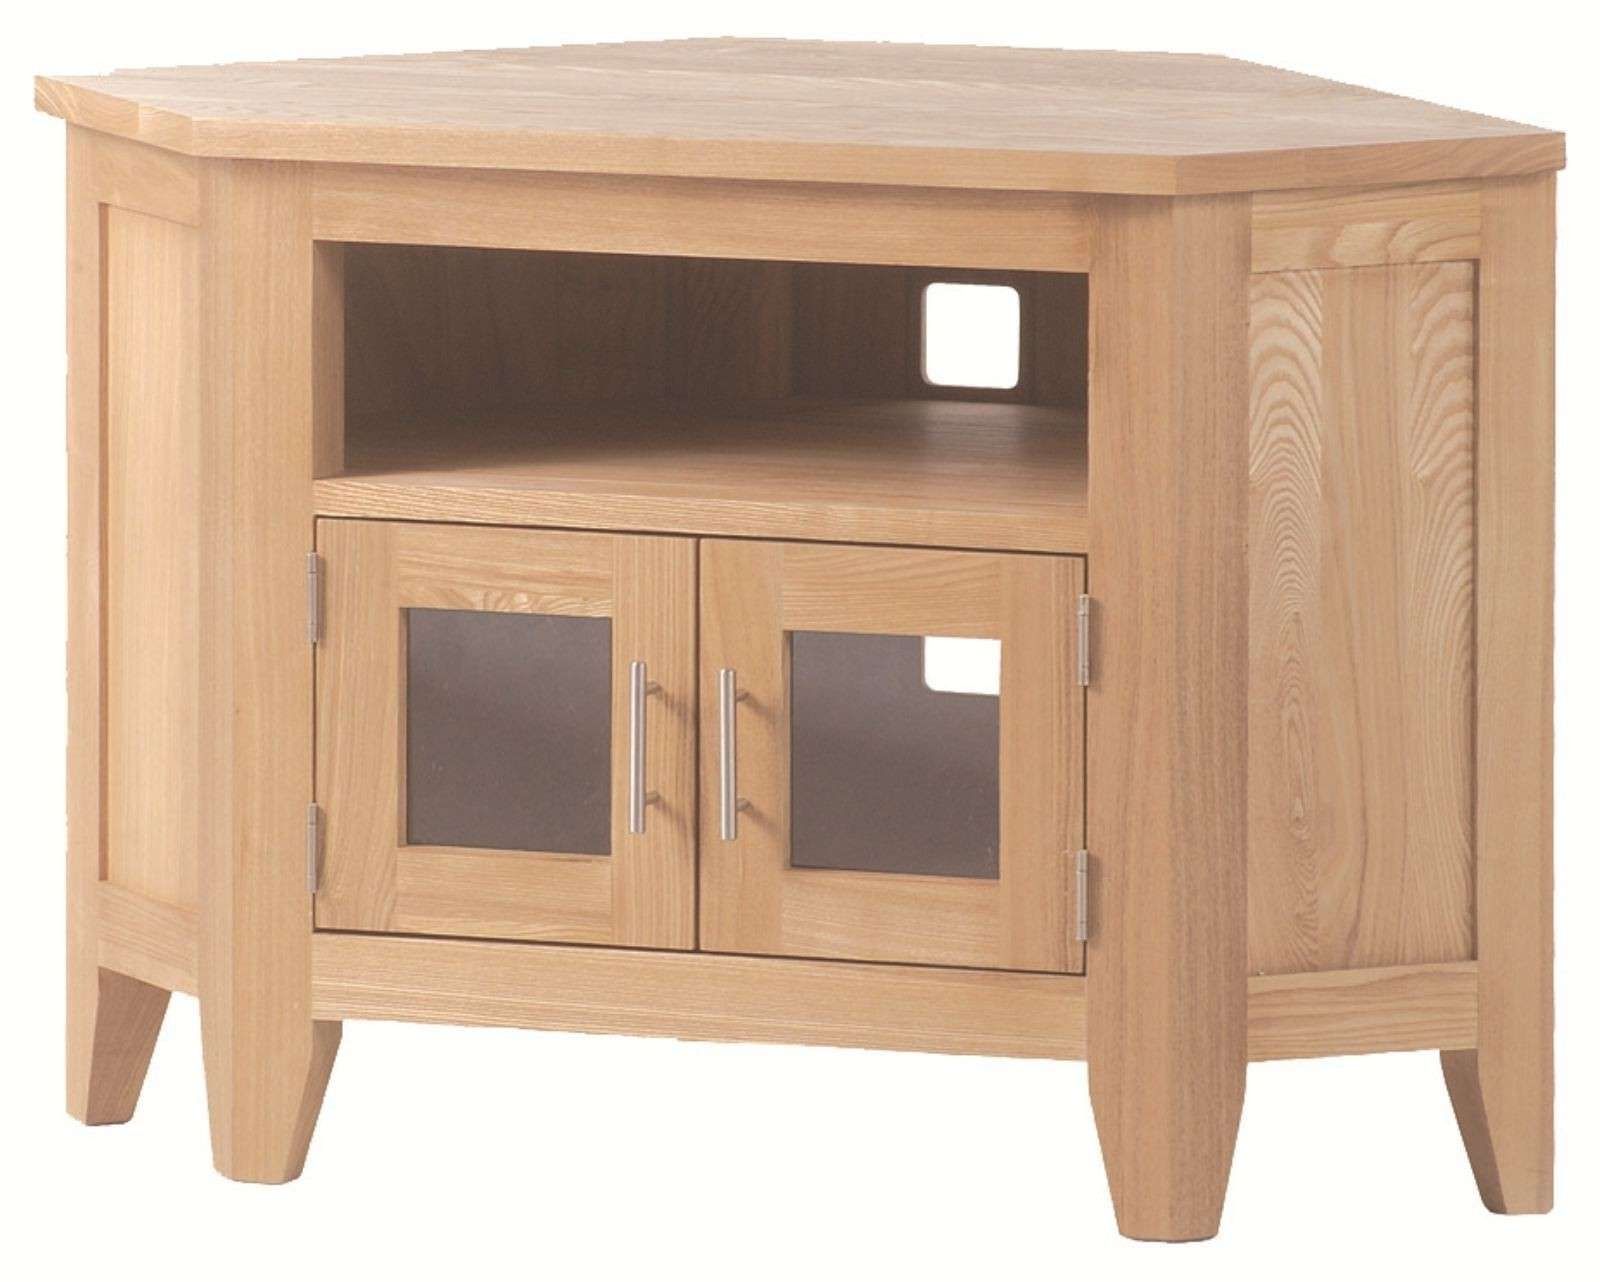 Wooden Corner Tv Stand With Small Cabinet Doors And Silver Handle With Silver Corner Tv Stands (View 15 of 15)